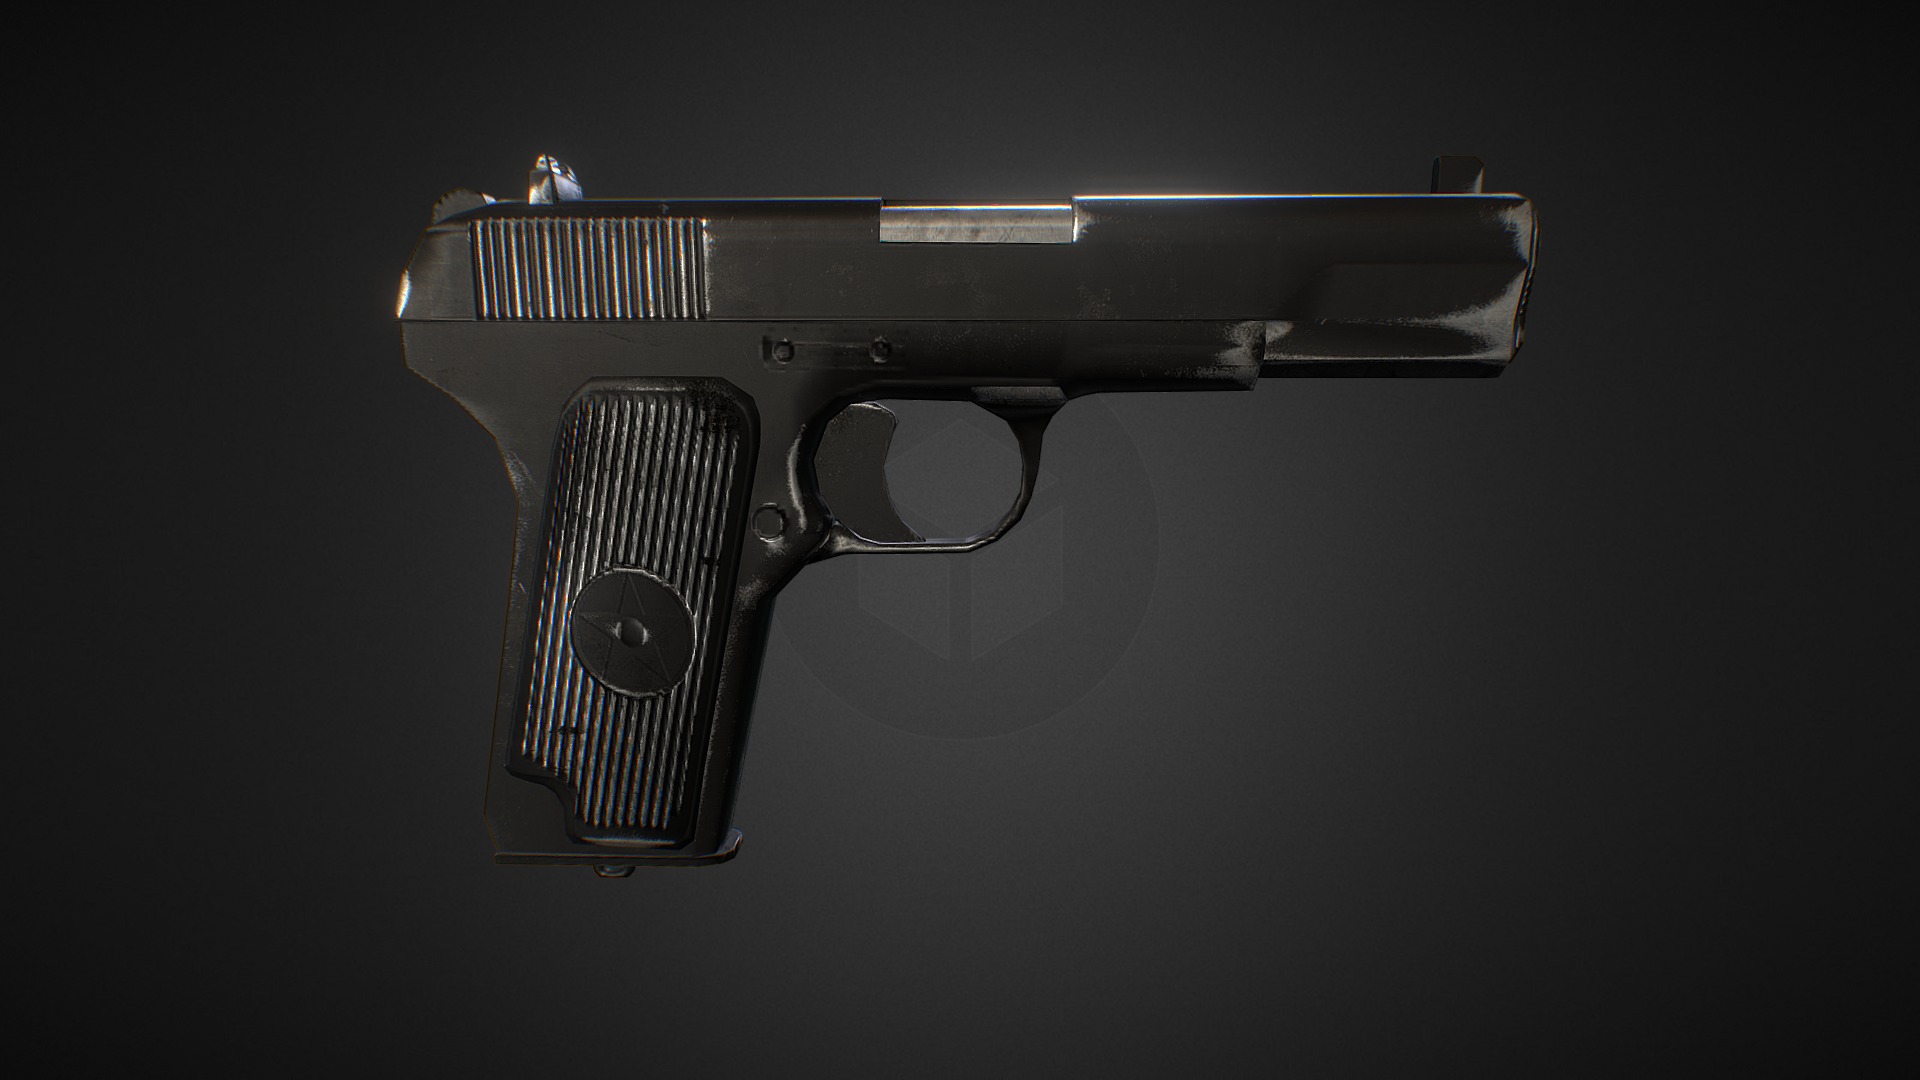 3D model TT pistol - This is a 3D model of the TT pistol. The 3D model is about a black and silver gun.